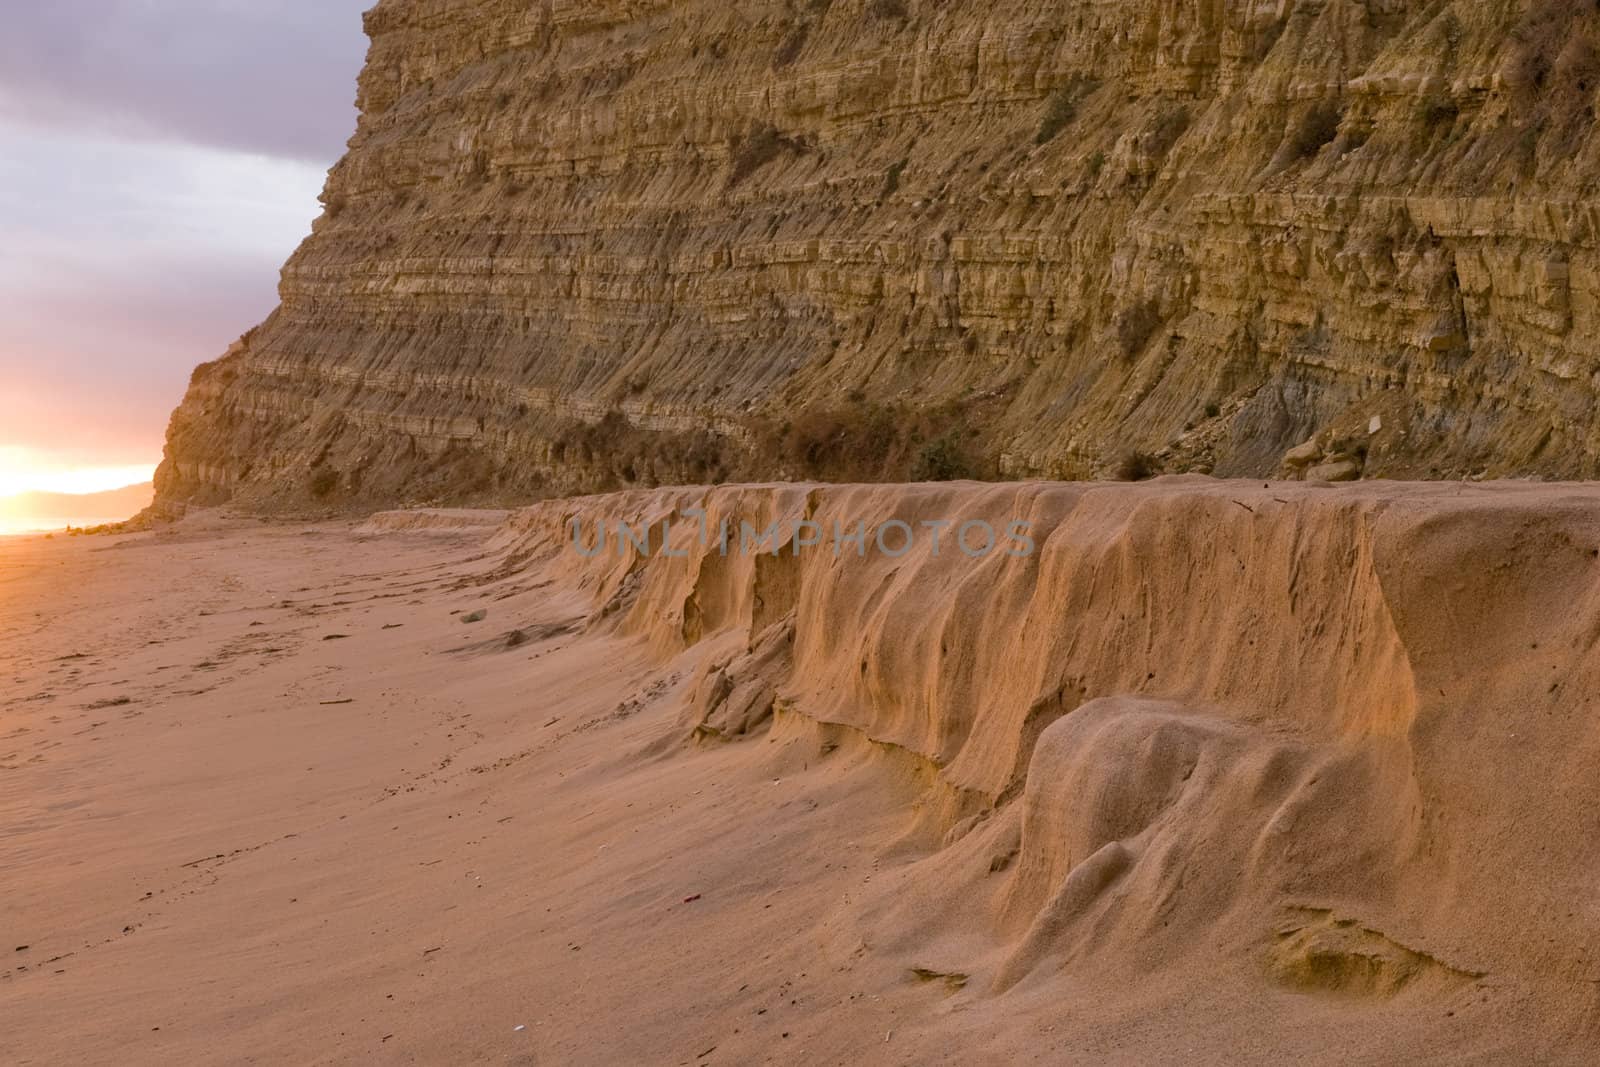 Beach meets cliff at sunset by woodygraphs